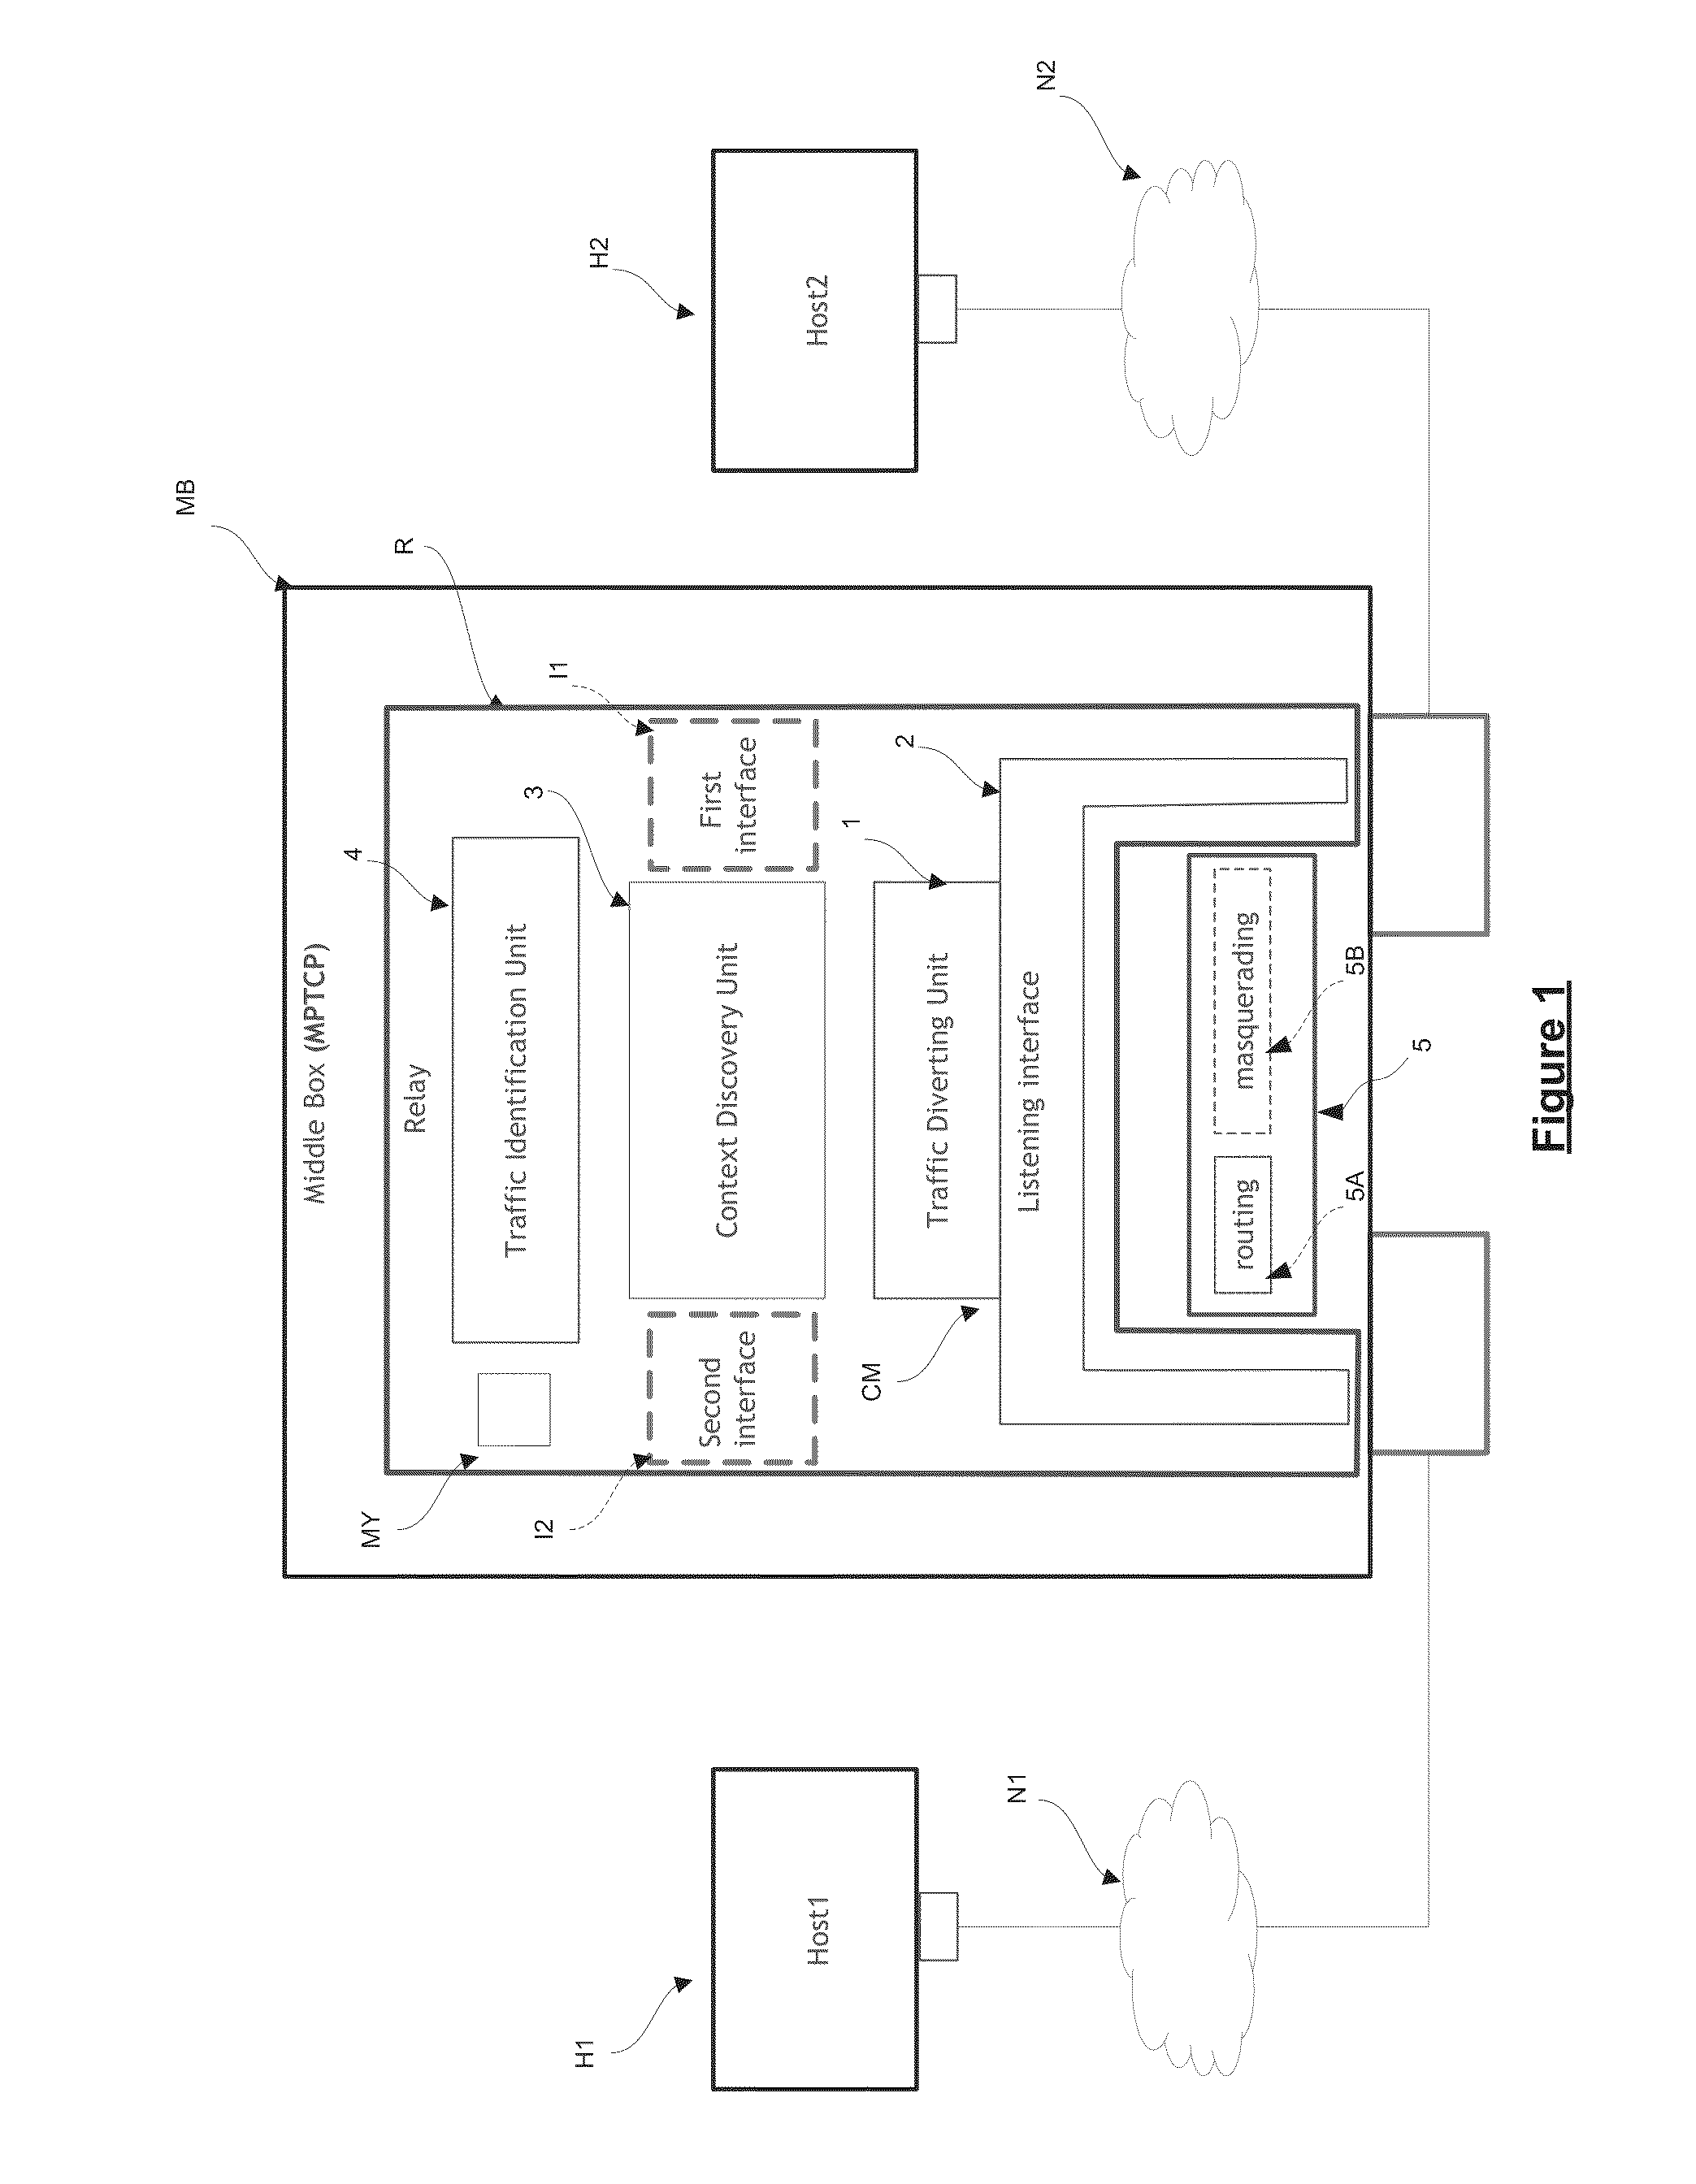 Method for connecting a first host and a second host within at least one communication network through a relay module, corresponding relay module